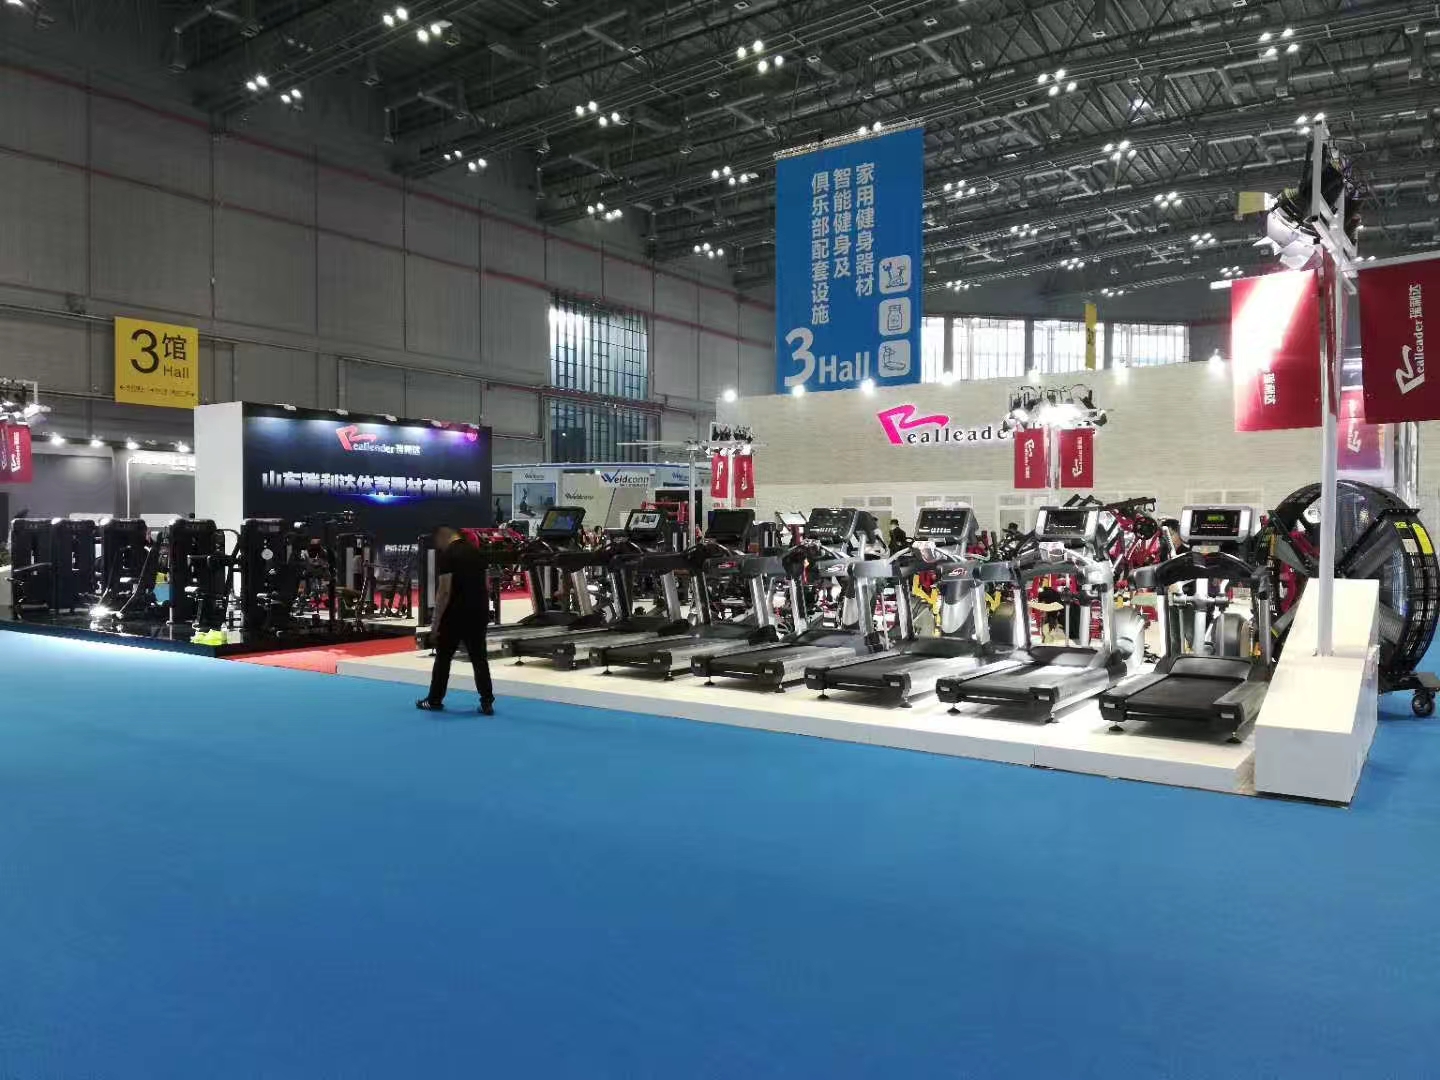 Realleader USA at China International Sport Show in Shanghai 